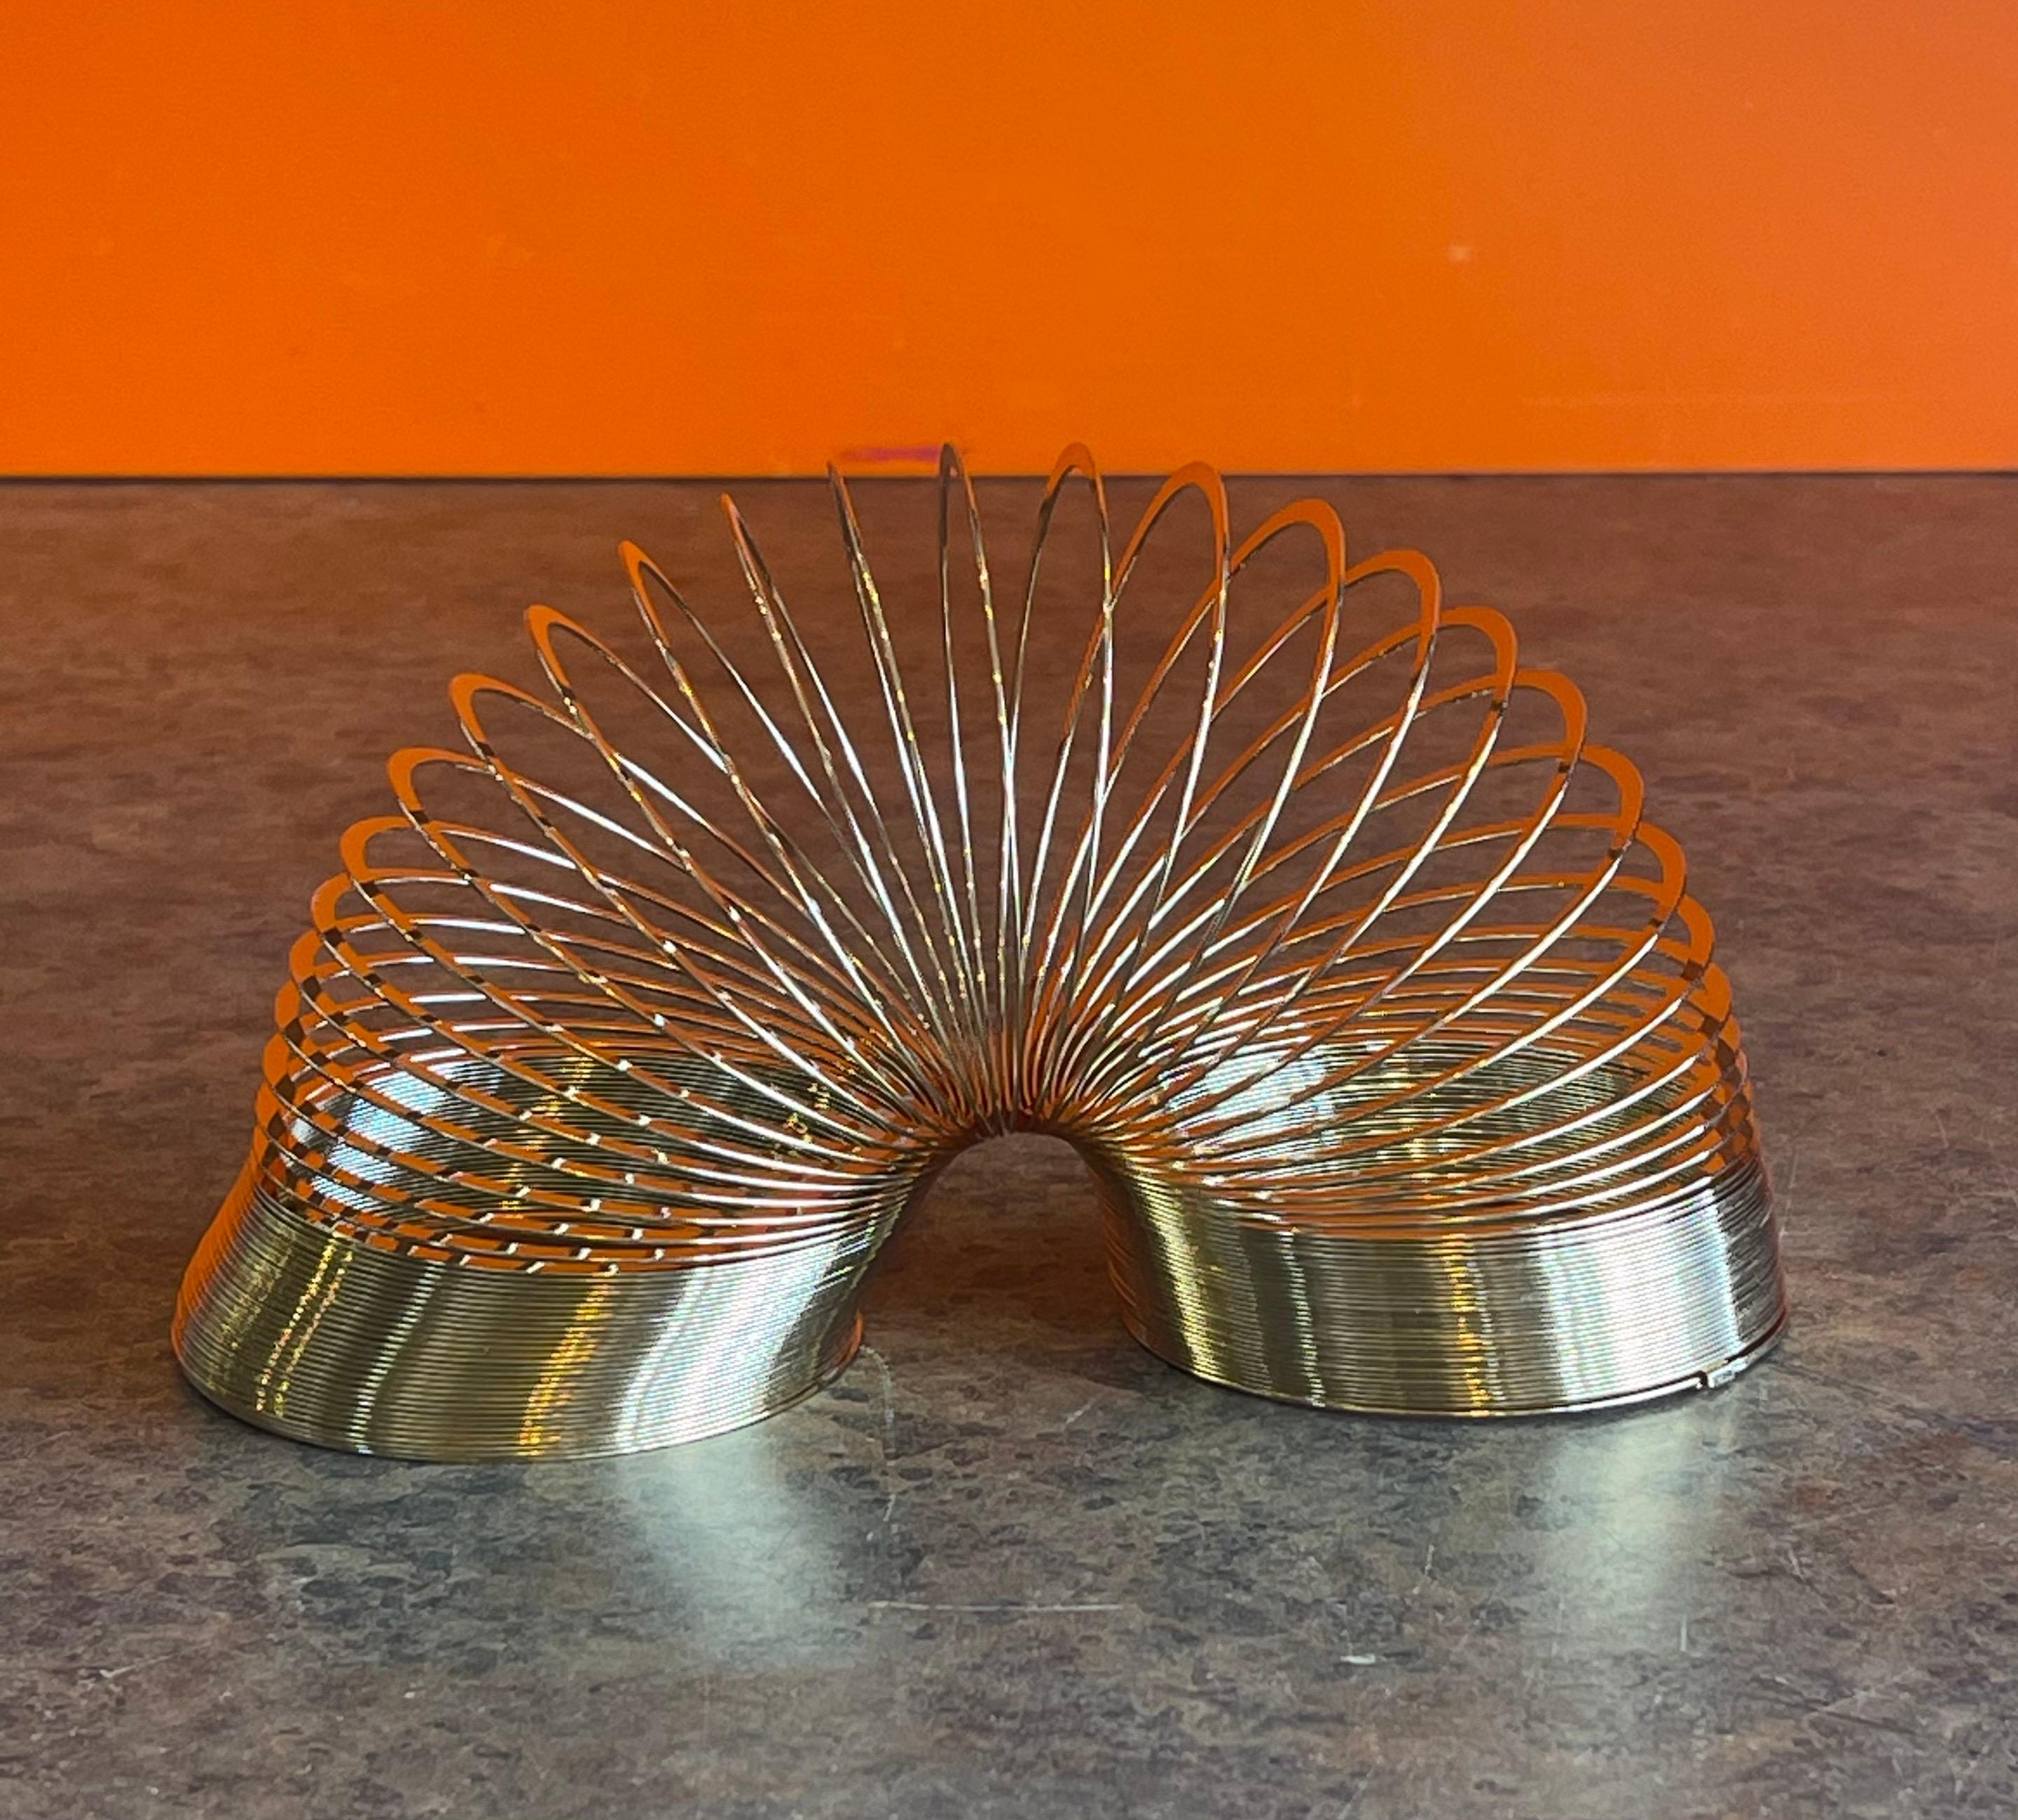 50th Anniversary gold-plated brass Slinky toy in wood box, circa 1995. This item is in very good vintage condition with minimal use and comes with the original brochure. The Slinky was released in 1995 to celebrate the toy's 50th anniversary; this